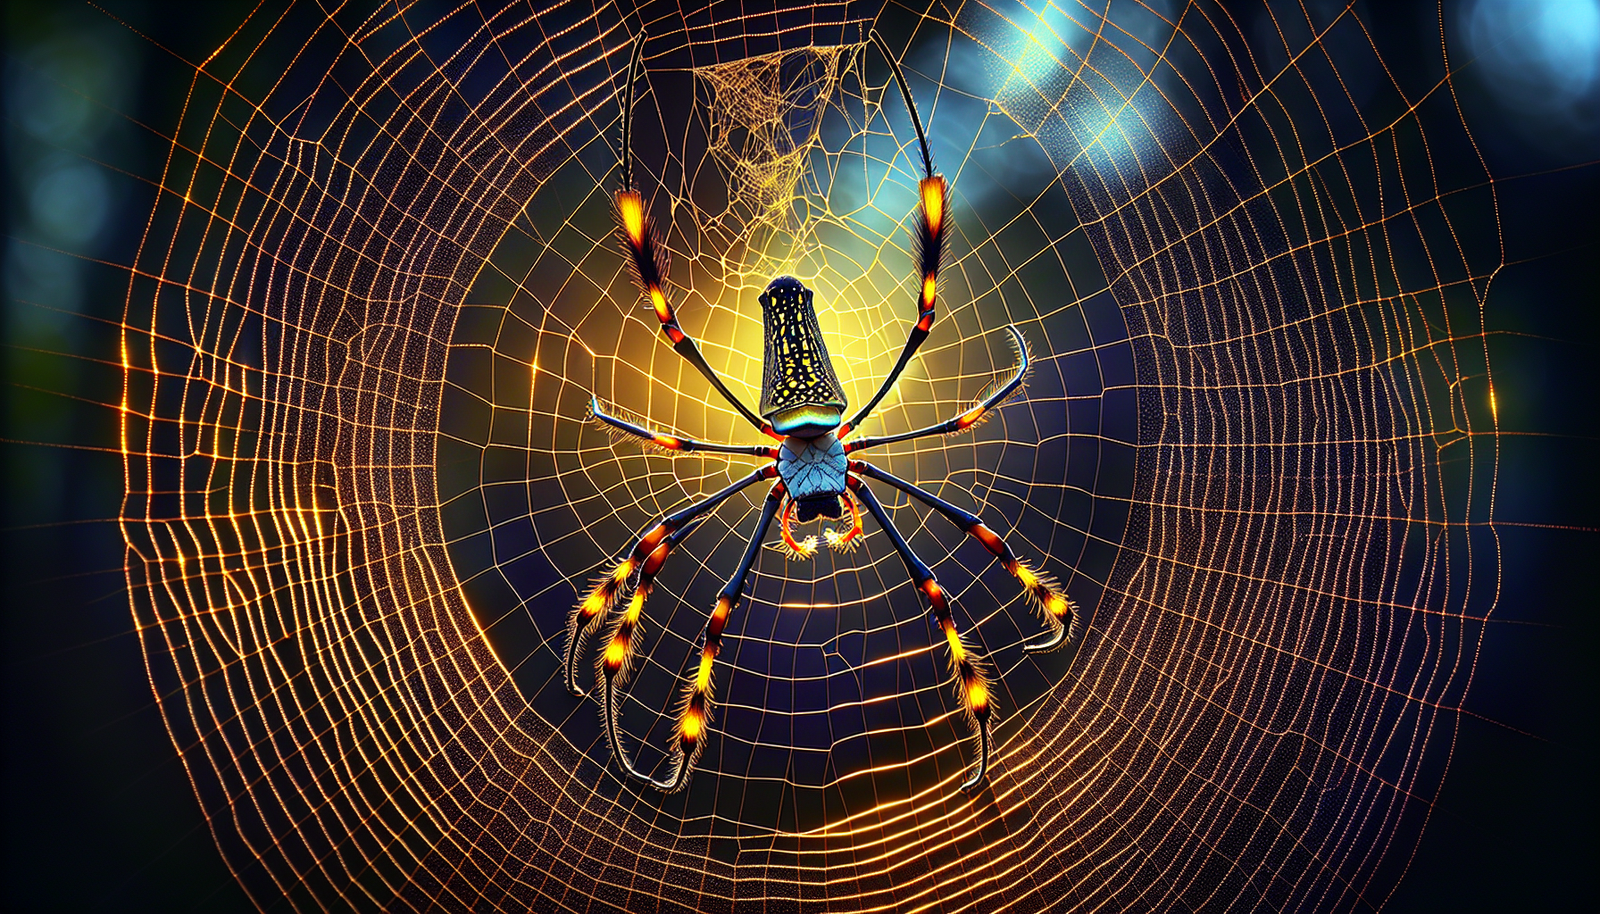 How Do You Handle And Care For The Enigmatic Golden Silk Orb-weaver Spider?